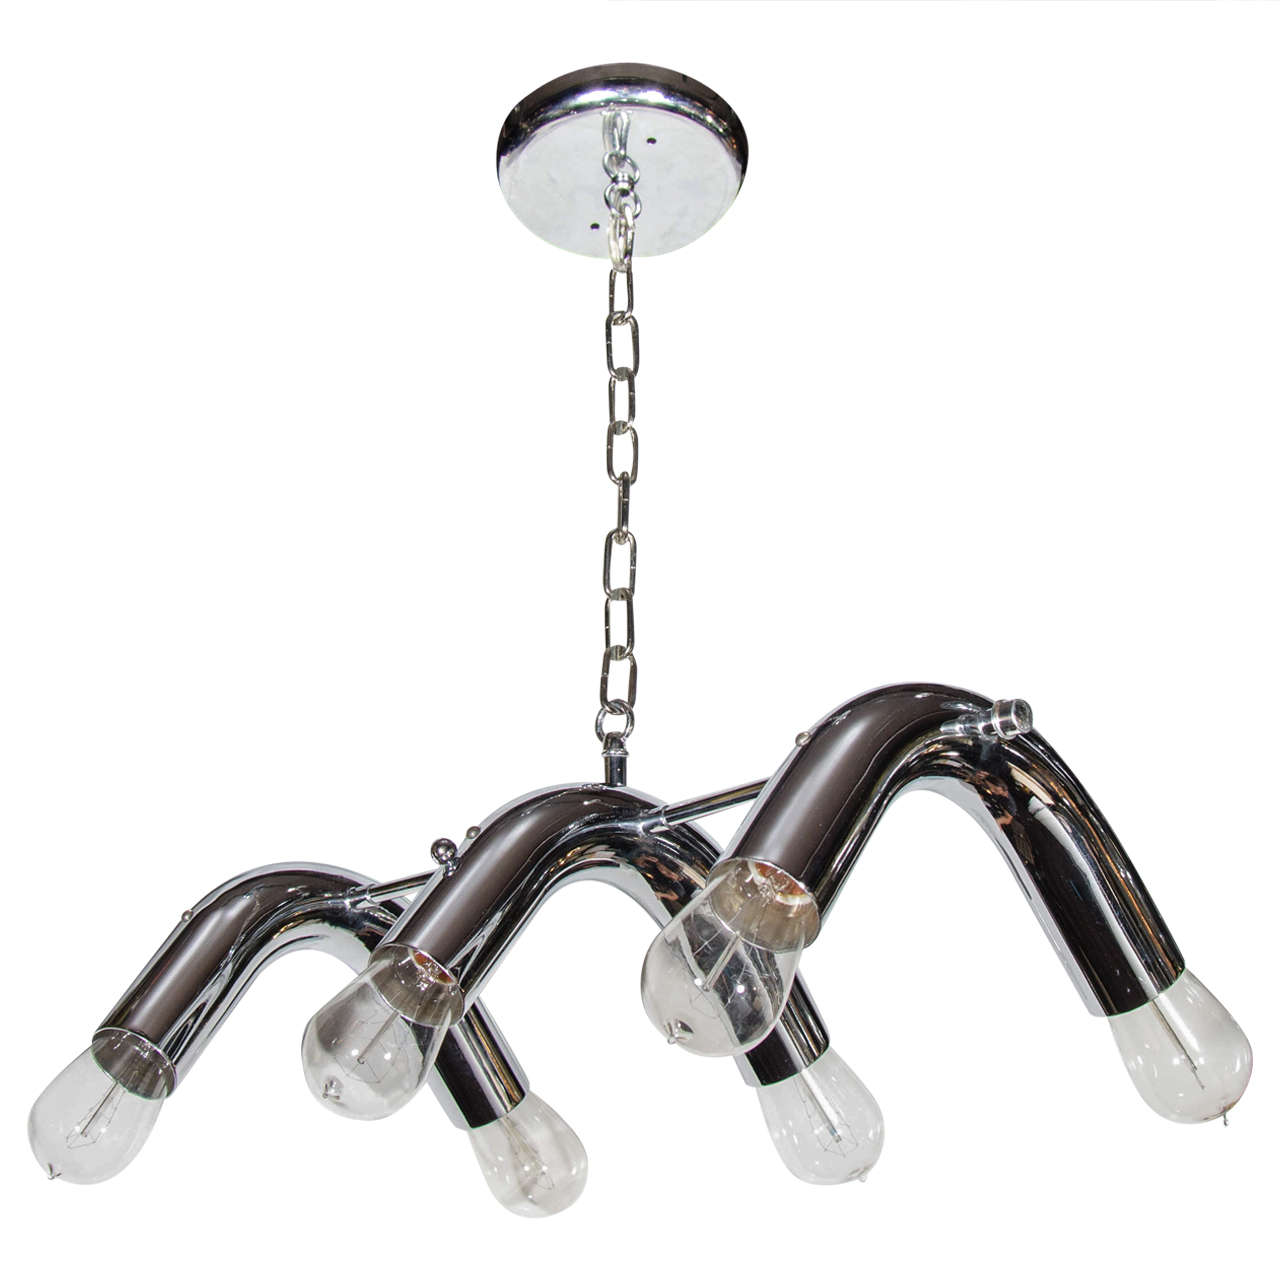 Mid-Century Modern light fixture with sculptural mobile frame. Tubular polished chrome frame fitted with six retro style filament light bulbs. Adjustable chain height.